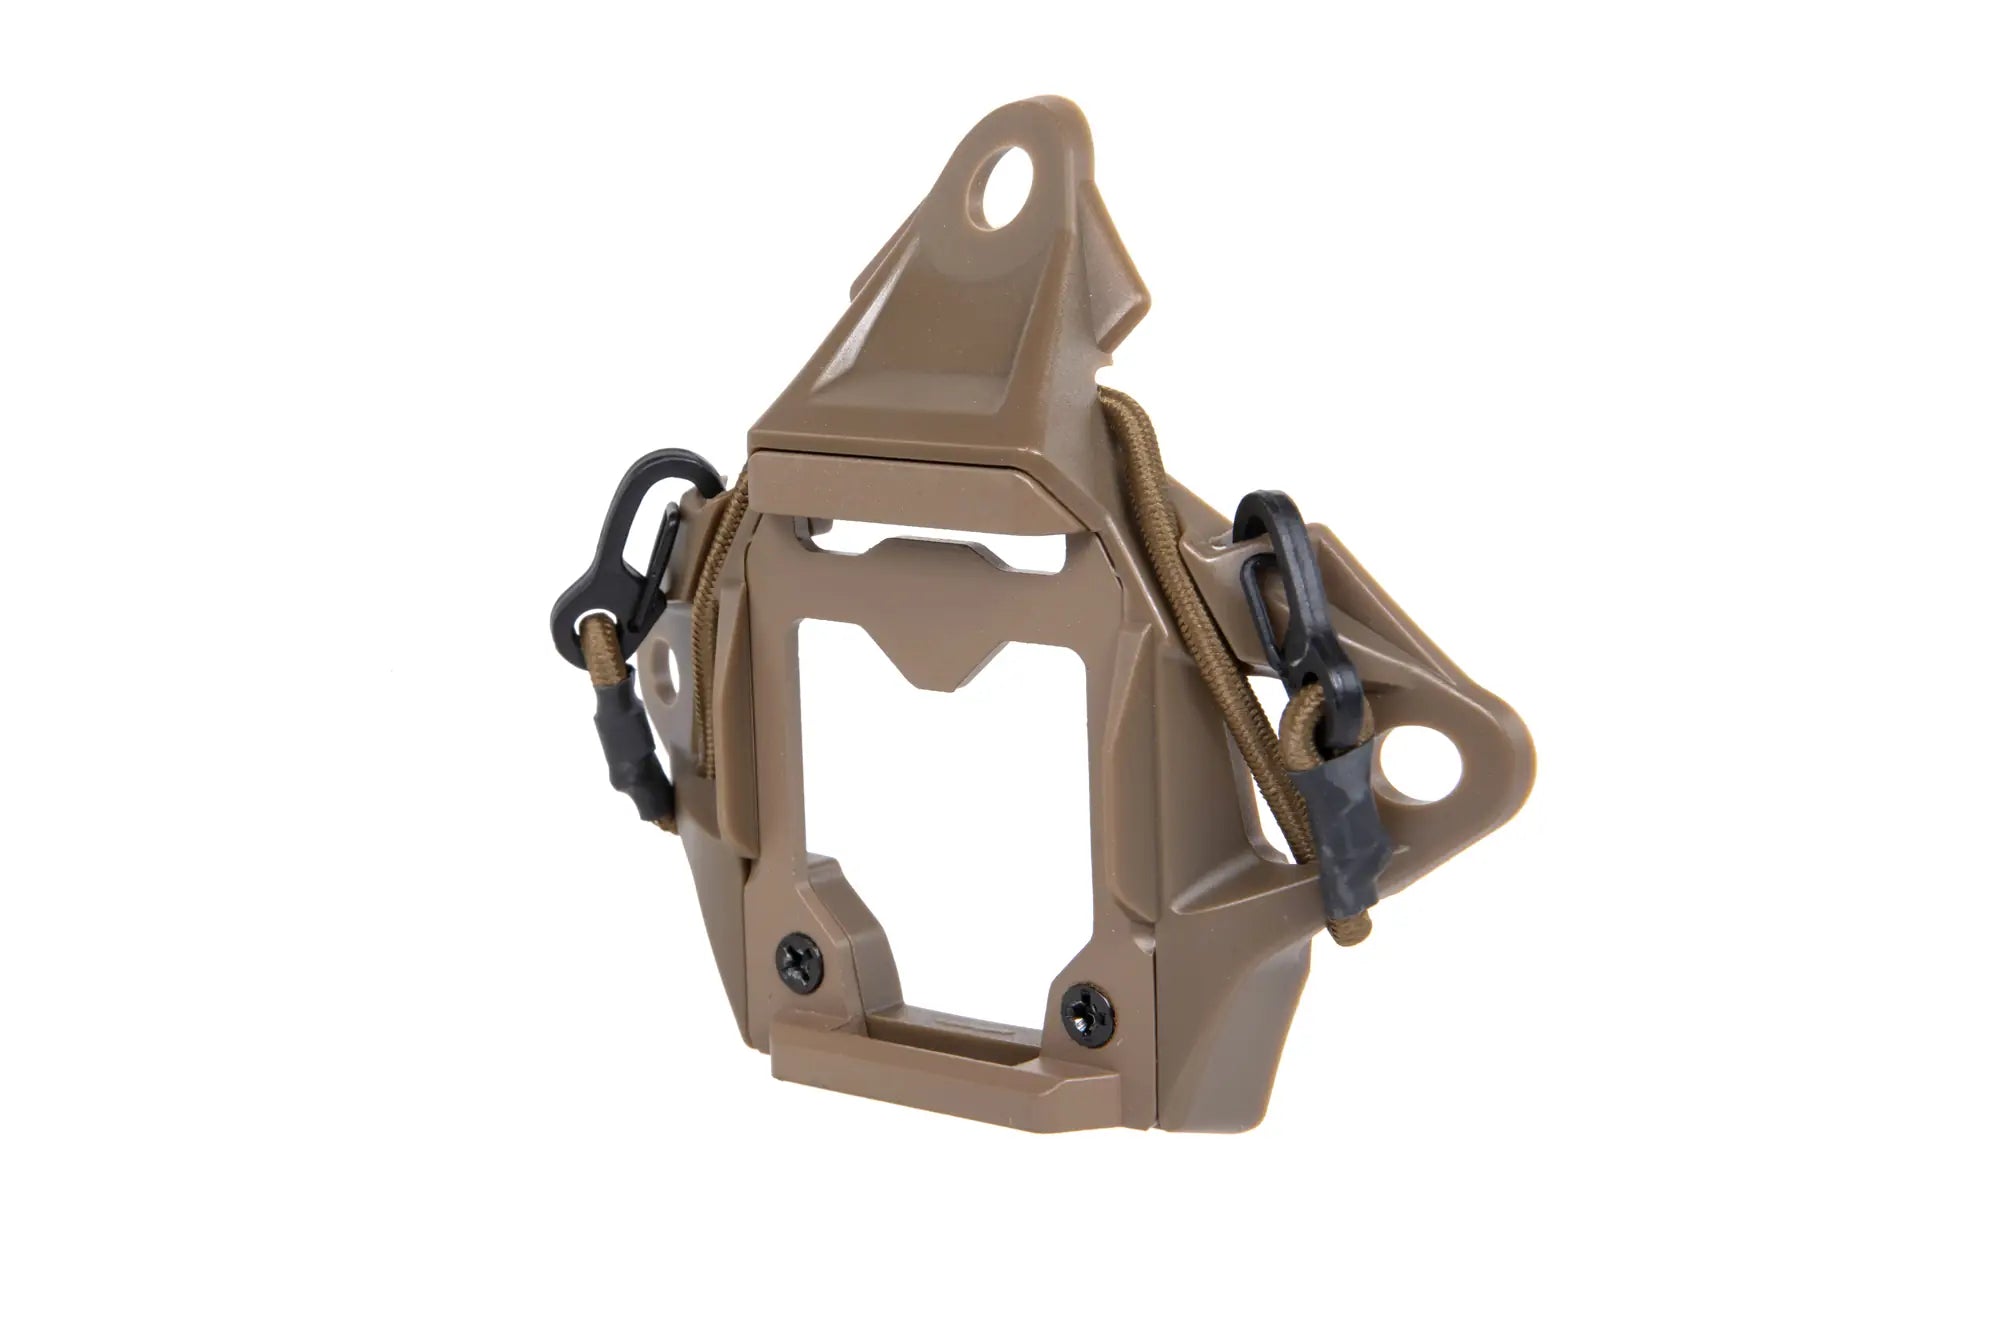 Mounting the Wosport FAST High Cut Tan night vision device-2